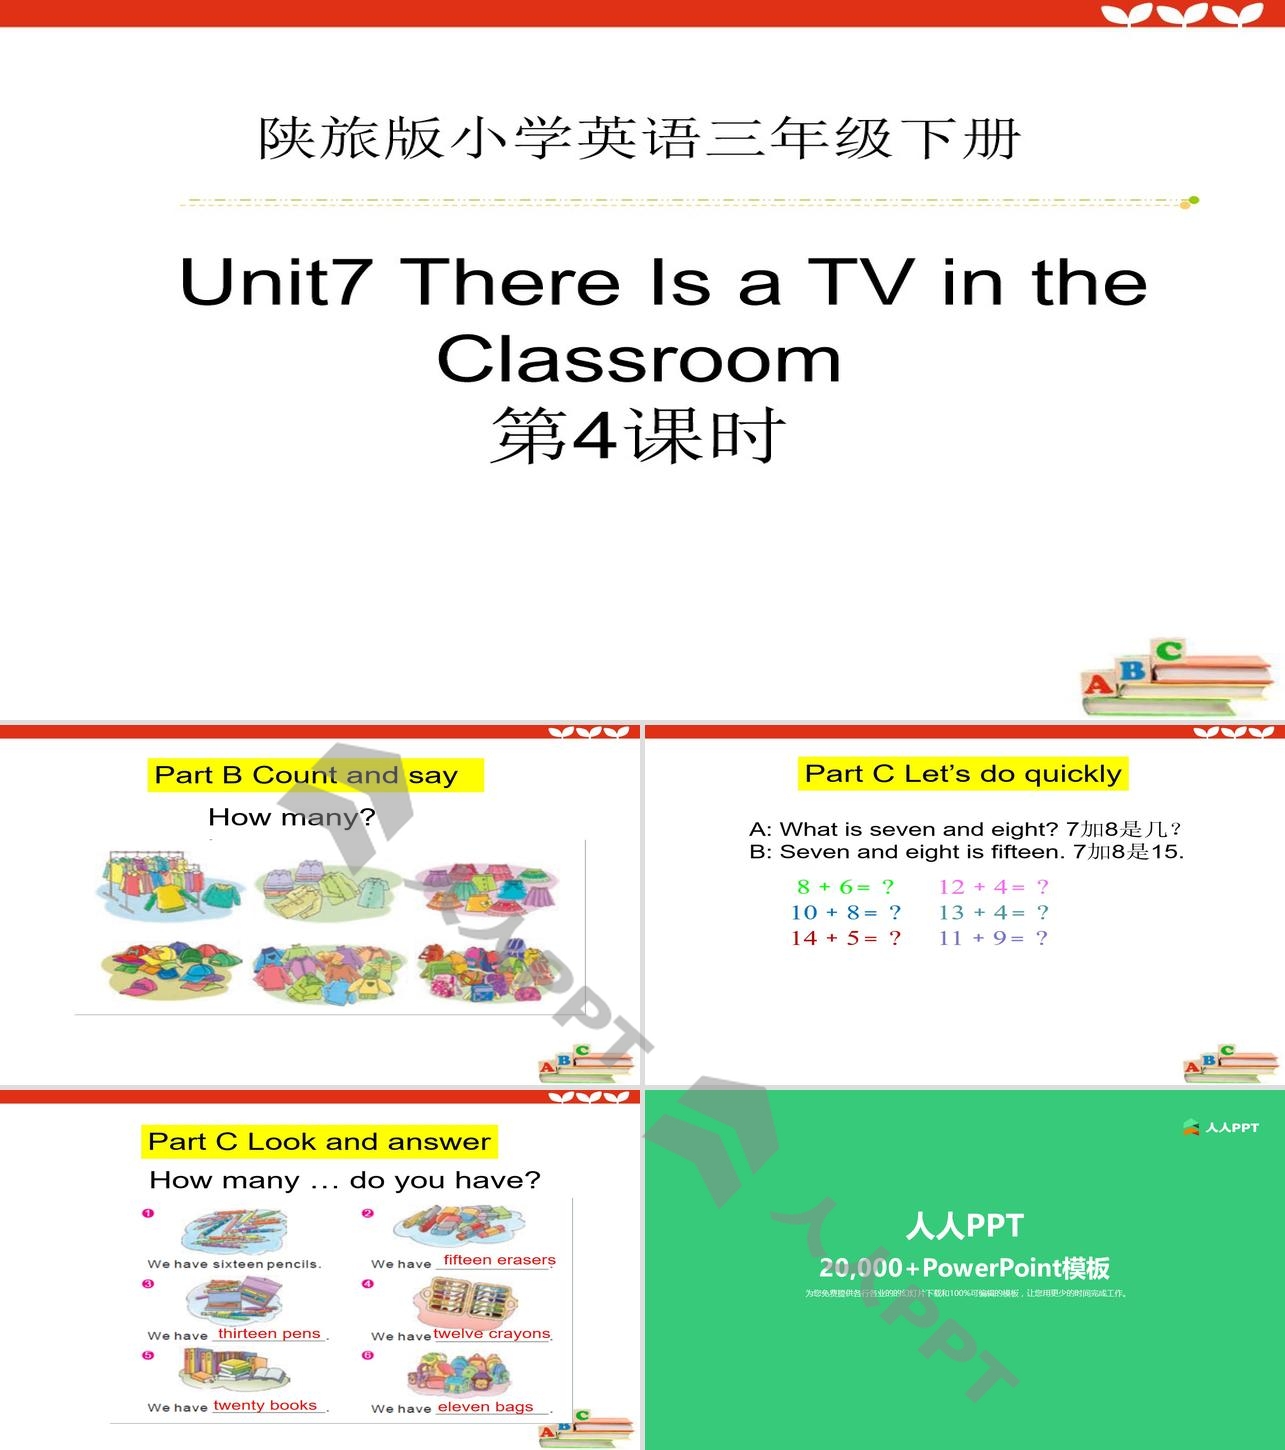 《There Is a TV in the Classroom》PPT课件下载长图